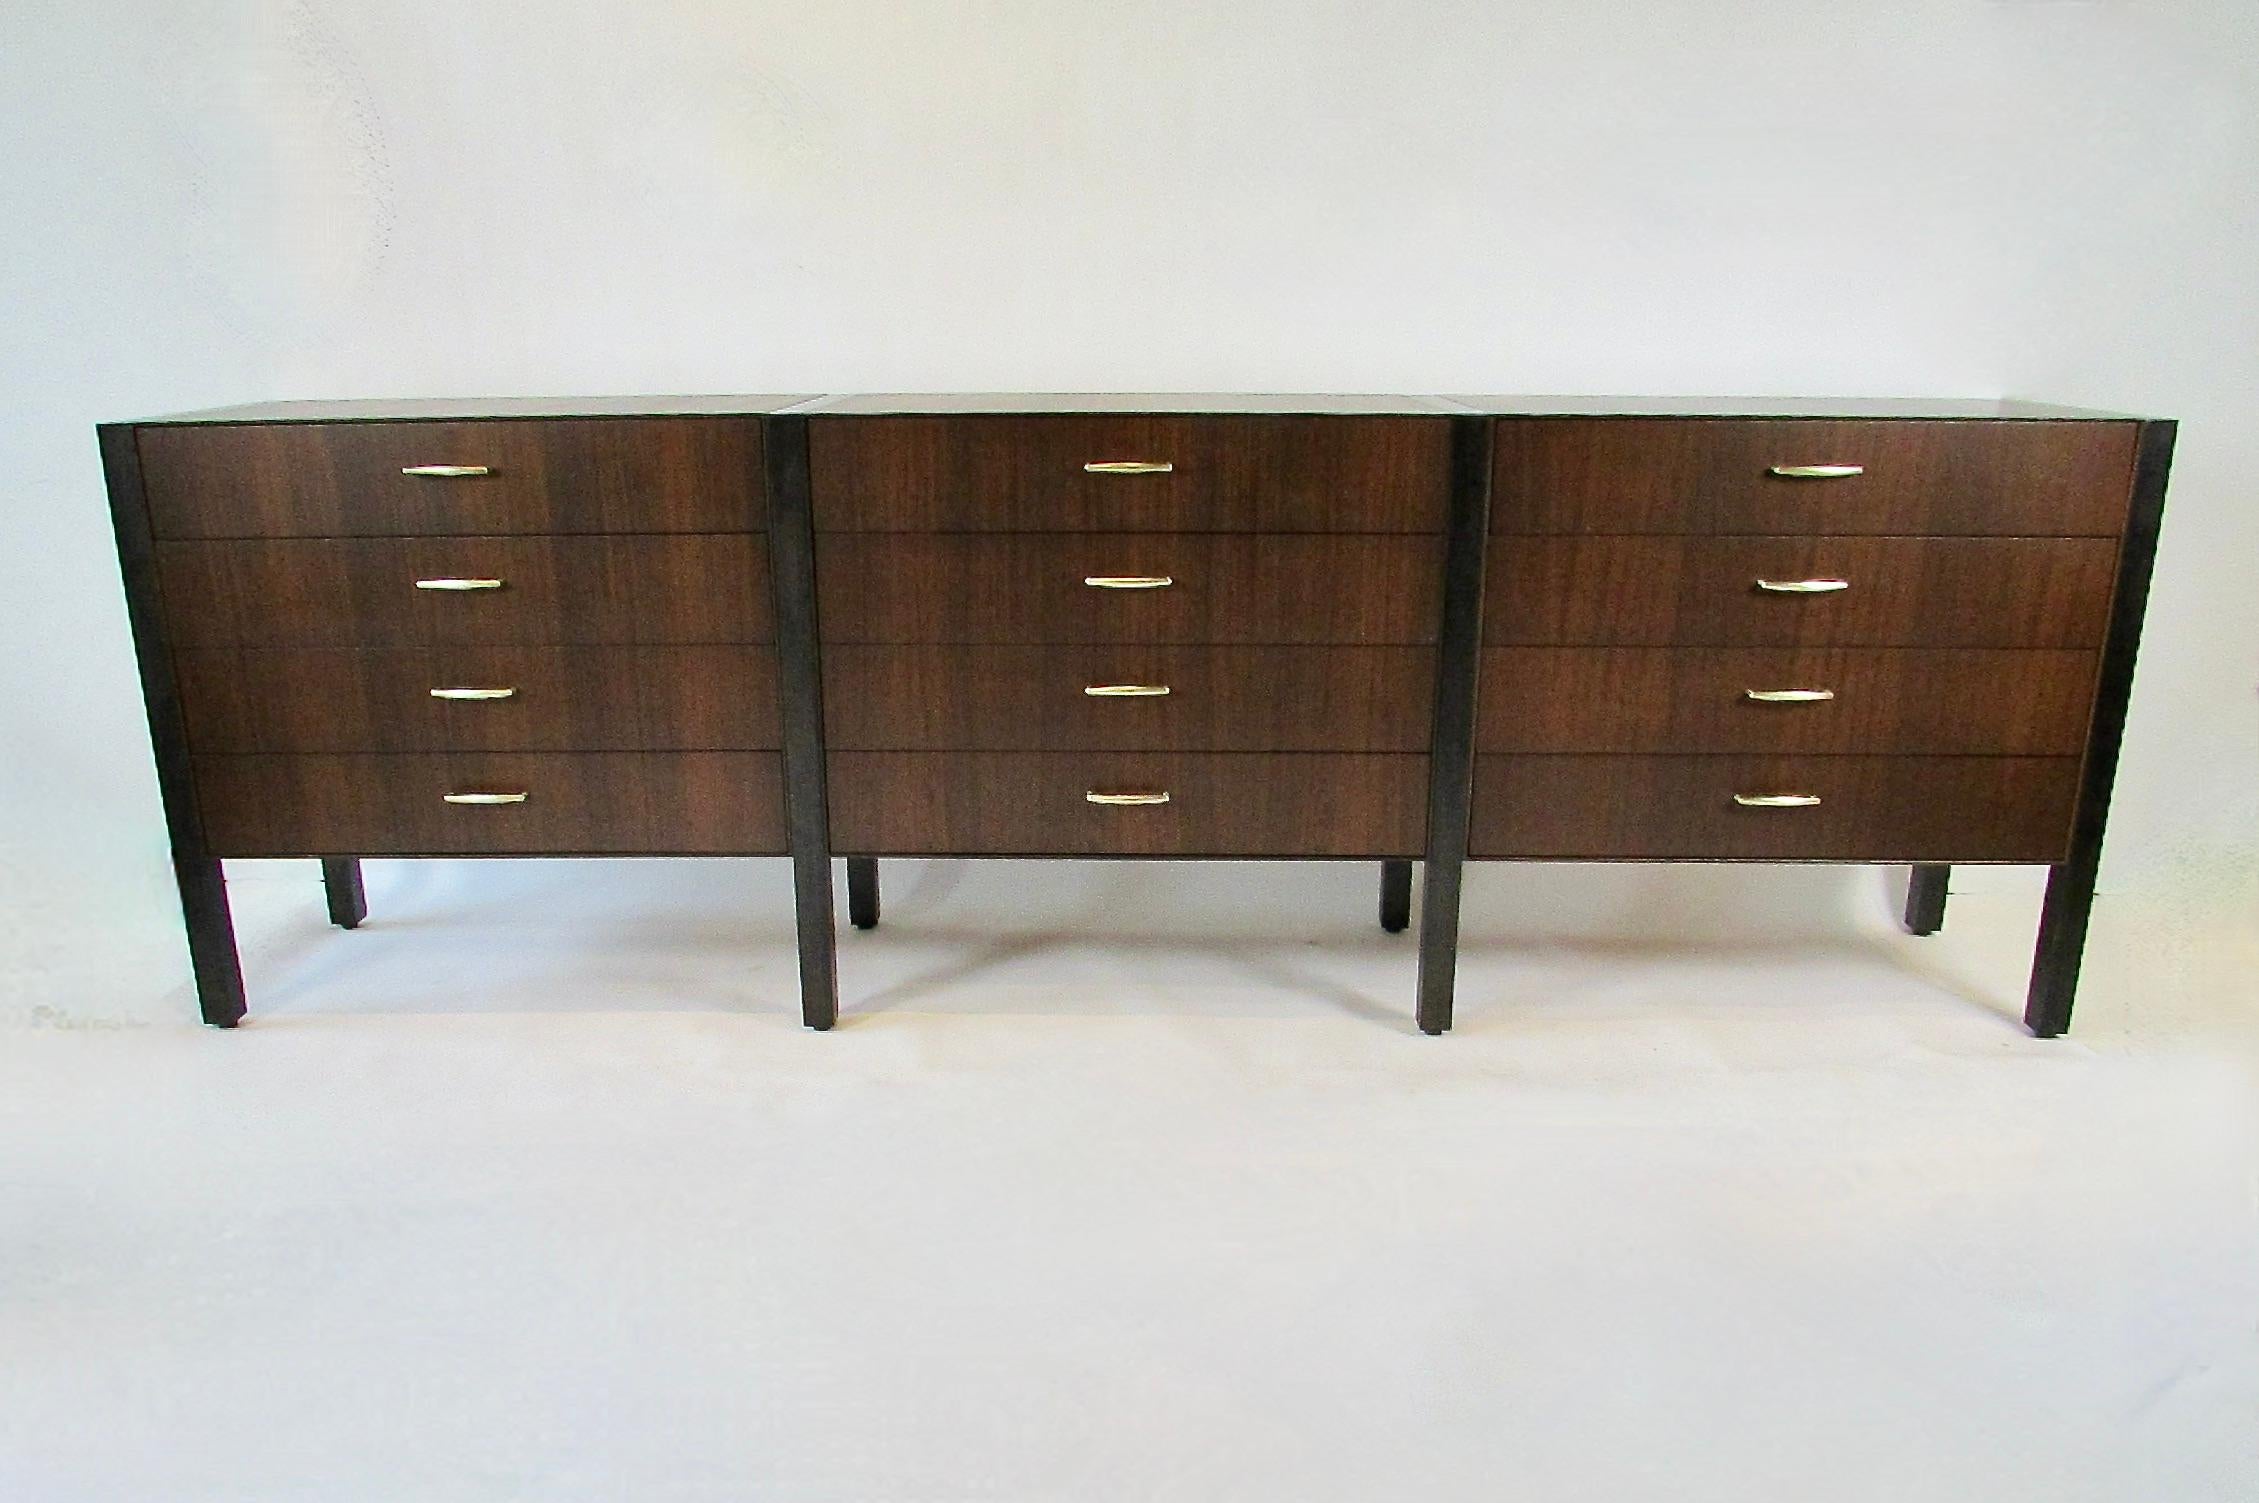 Another fine piece of furniture from Directional furniture . Home to so many modernist designers . Kagen , McCobb , Baughman ,Evans . This dresser part of the Directional Custom Collection I find to be a  spectacular example of Directional quality